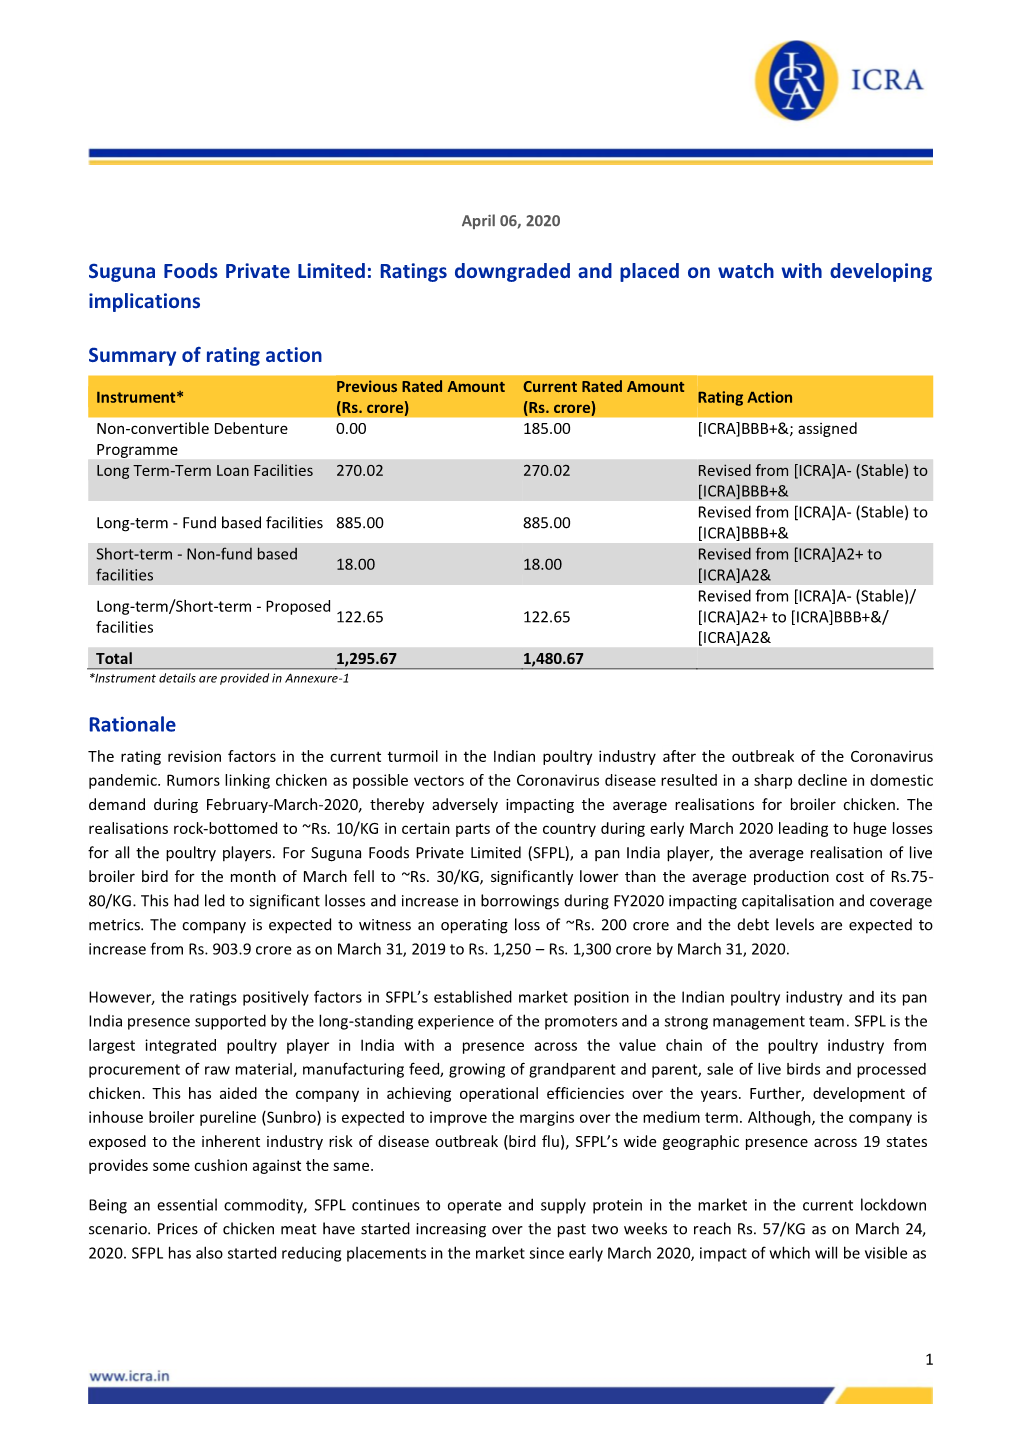 Suguna Foods Private Limited: Ratings Downgraded and Placed on Watch with Developing Implications